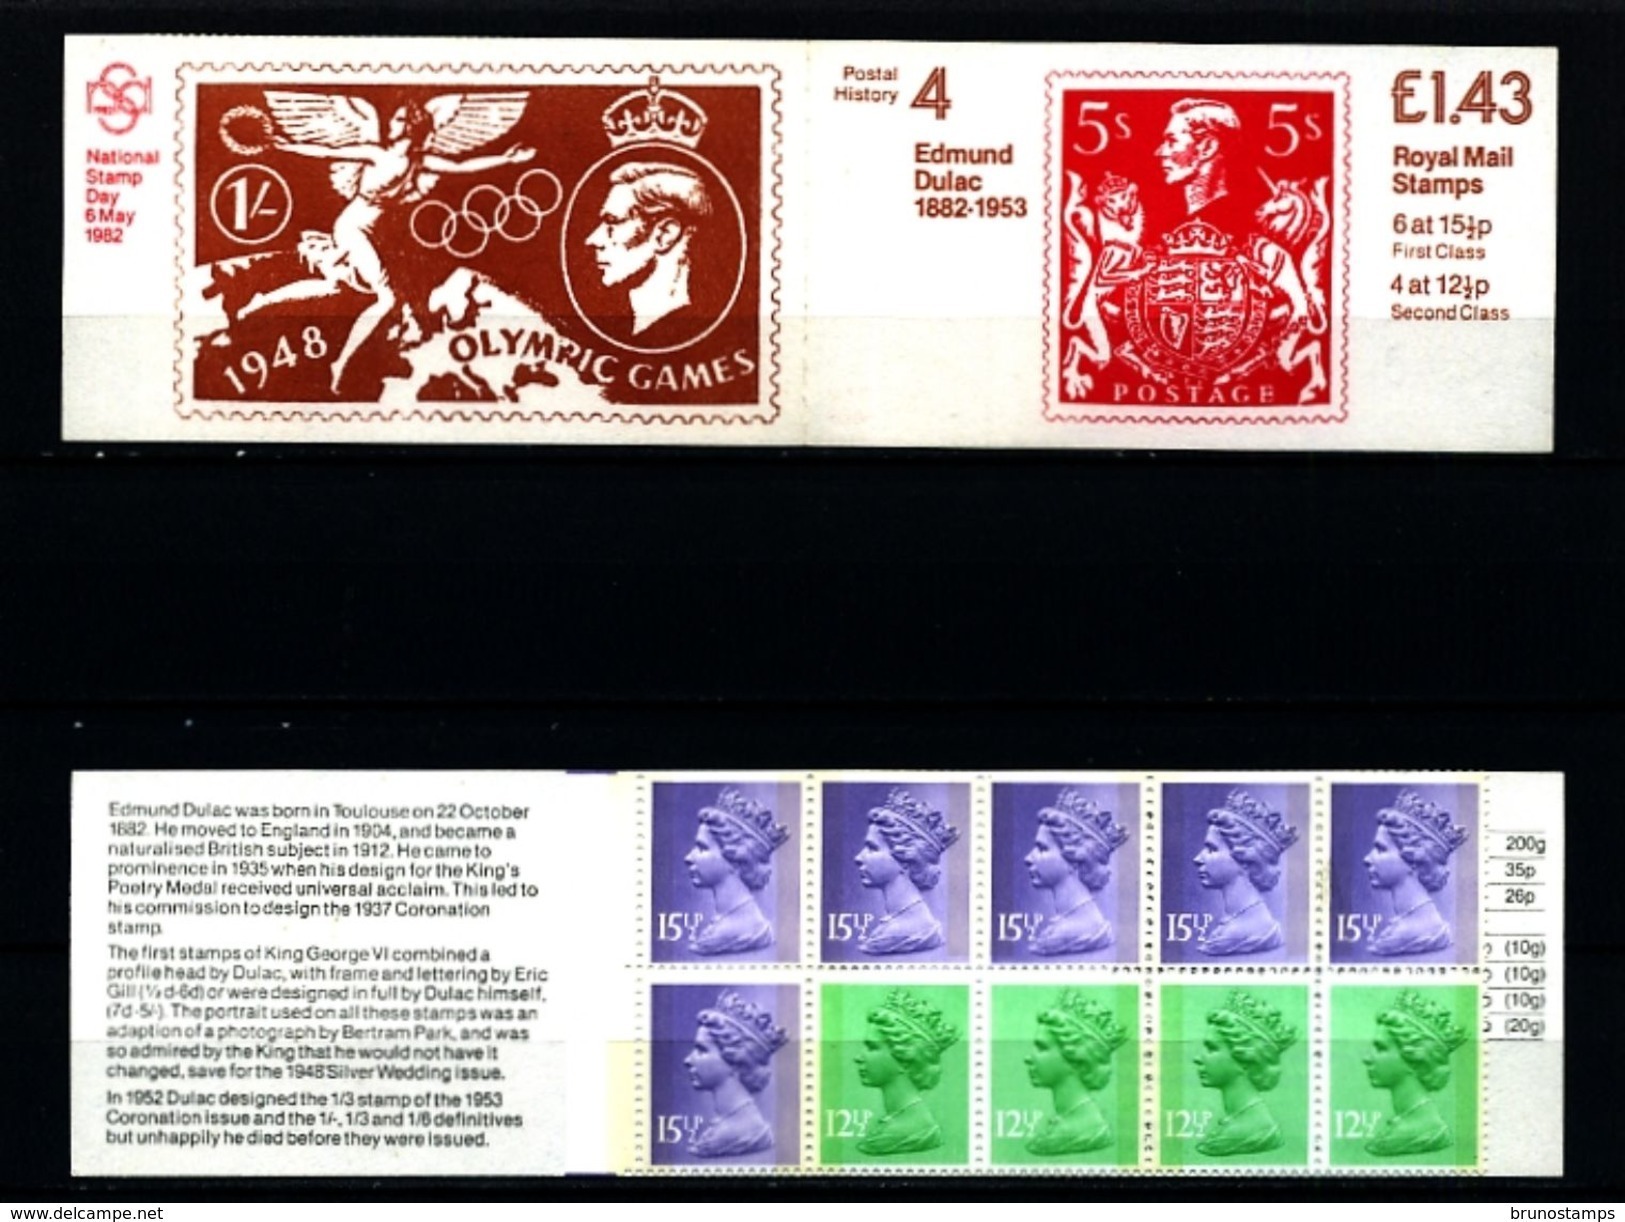 GREAT BRITAIN - 1982  £ 1.43  BOOKLET  EDMUND DULAC  LM  MINT NH  SG FN 2a - Carnets